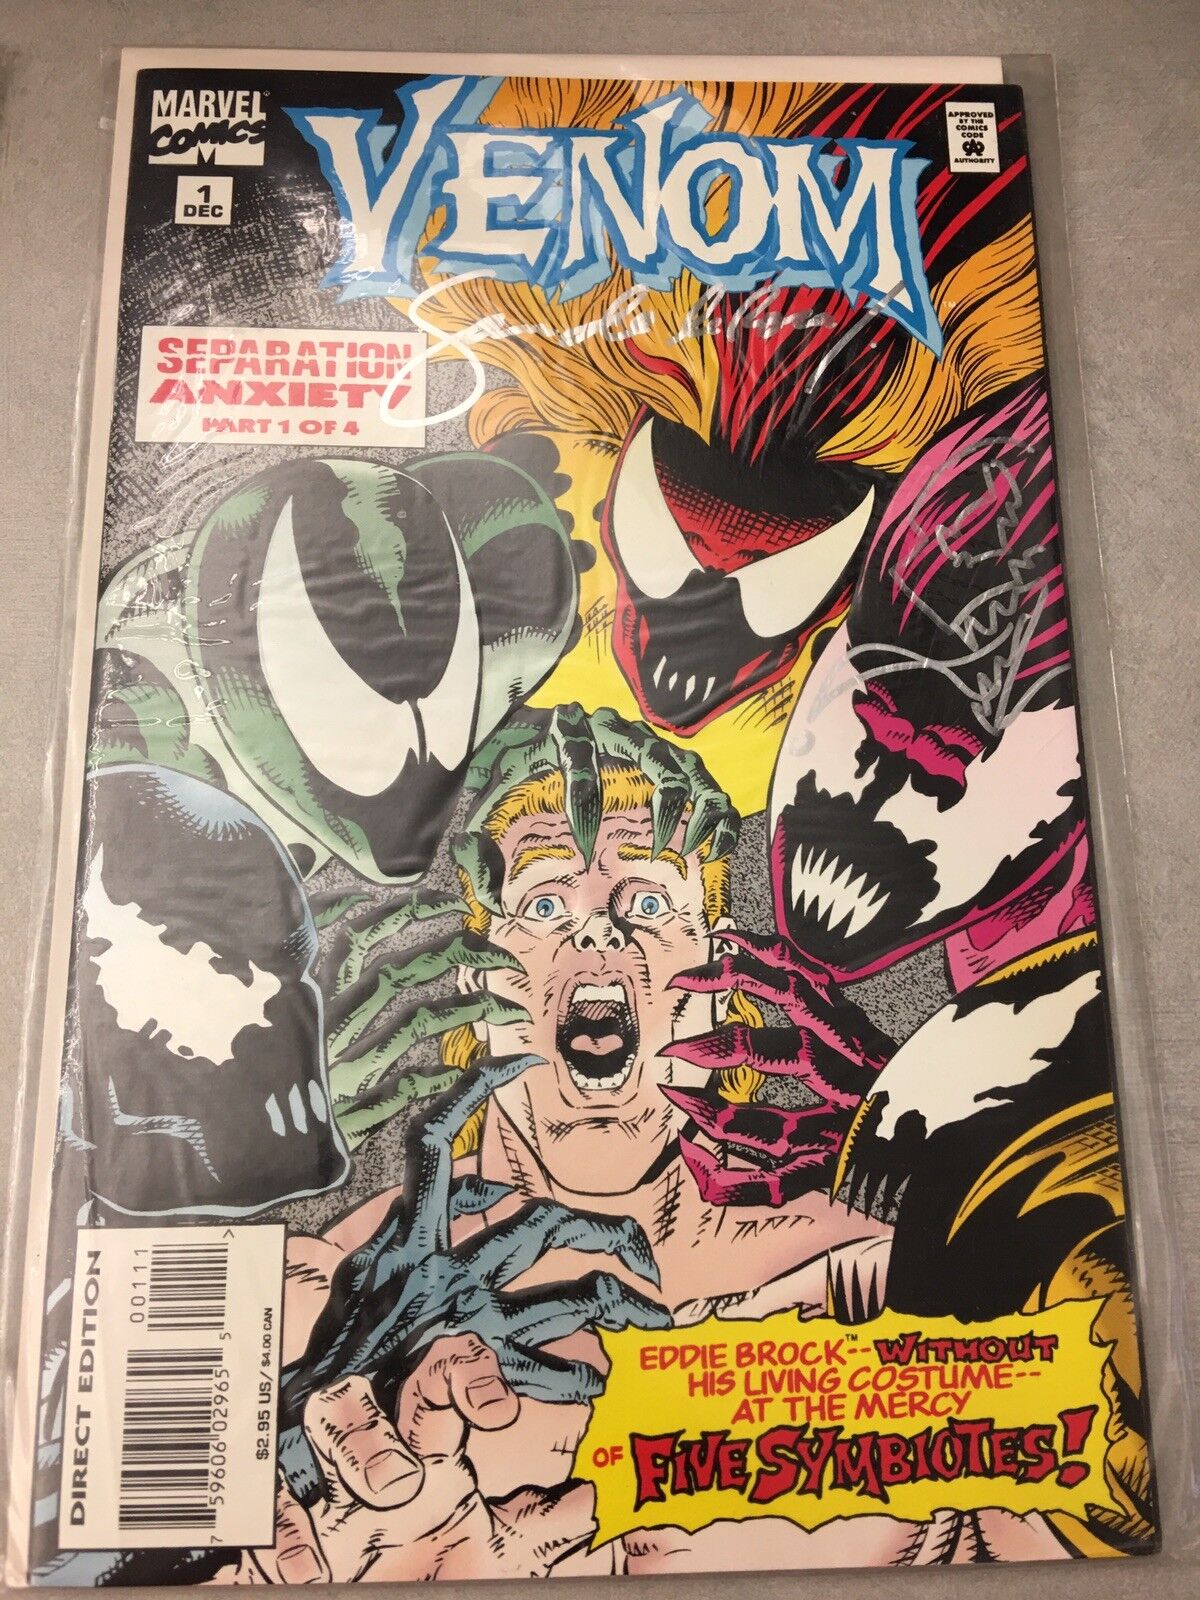 1994 VENOM SEPARATION ANXIETY PART 1 OF 4 COMIC AUTOGRAPHED